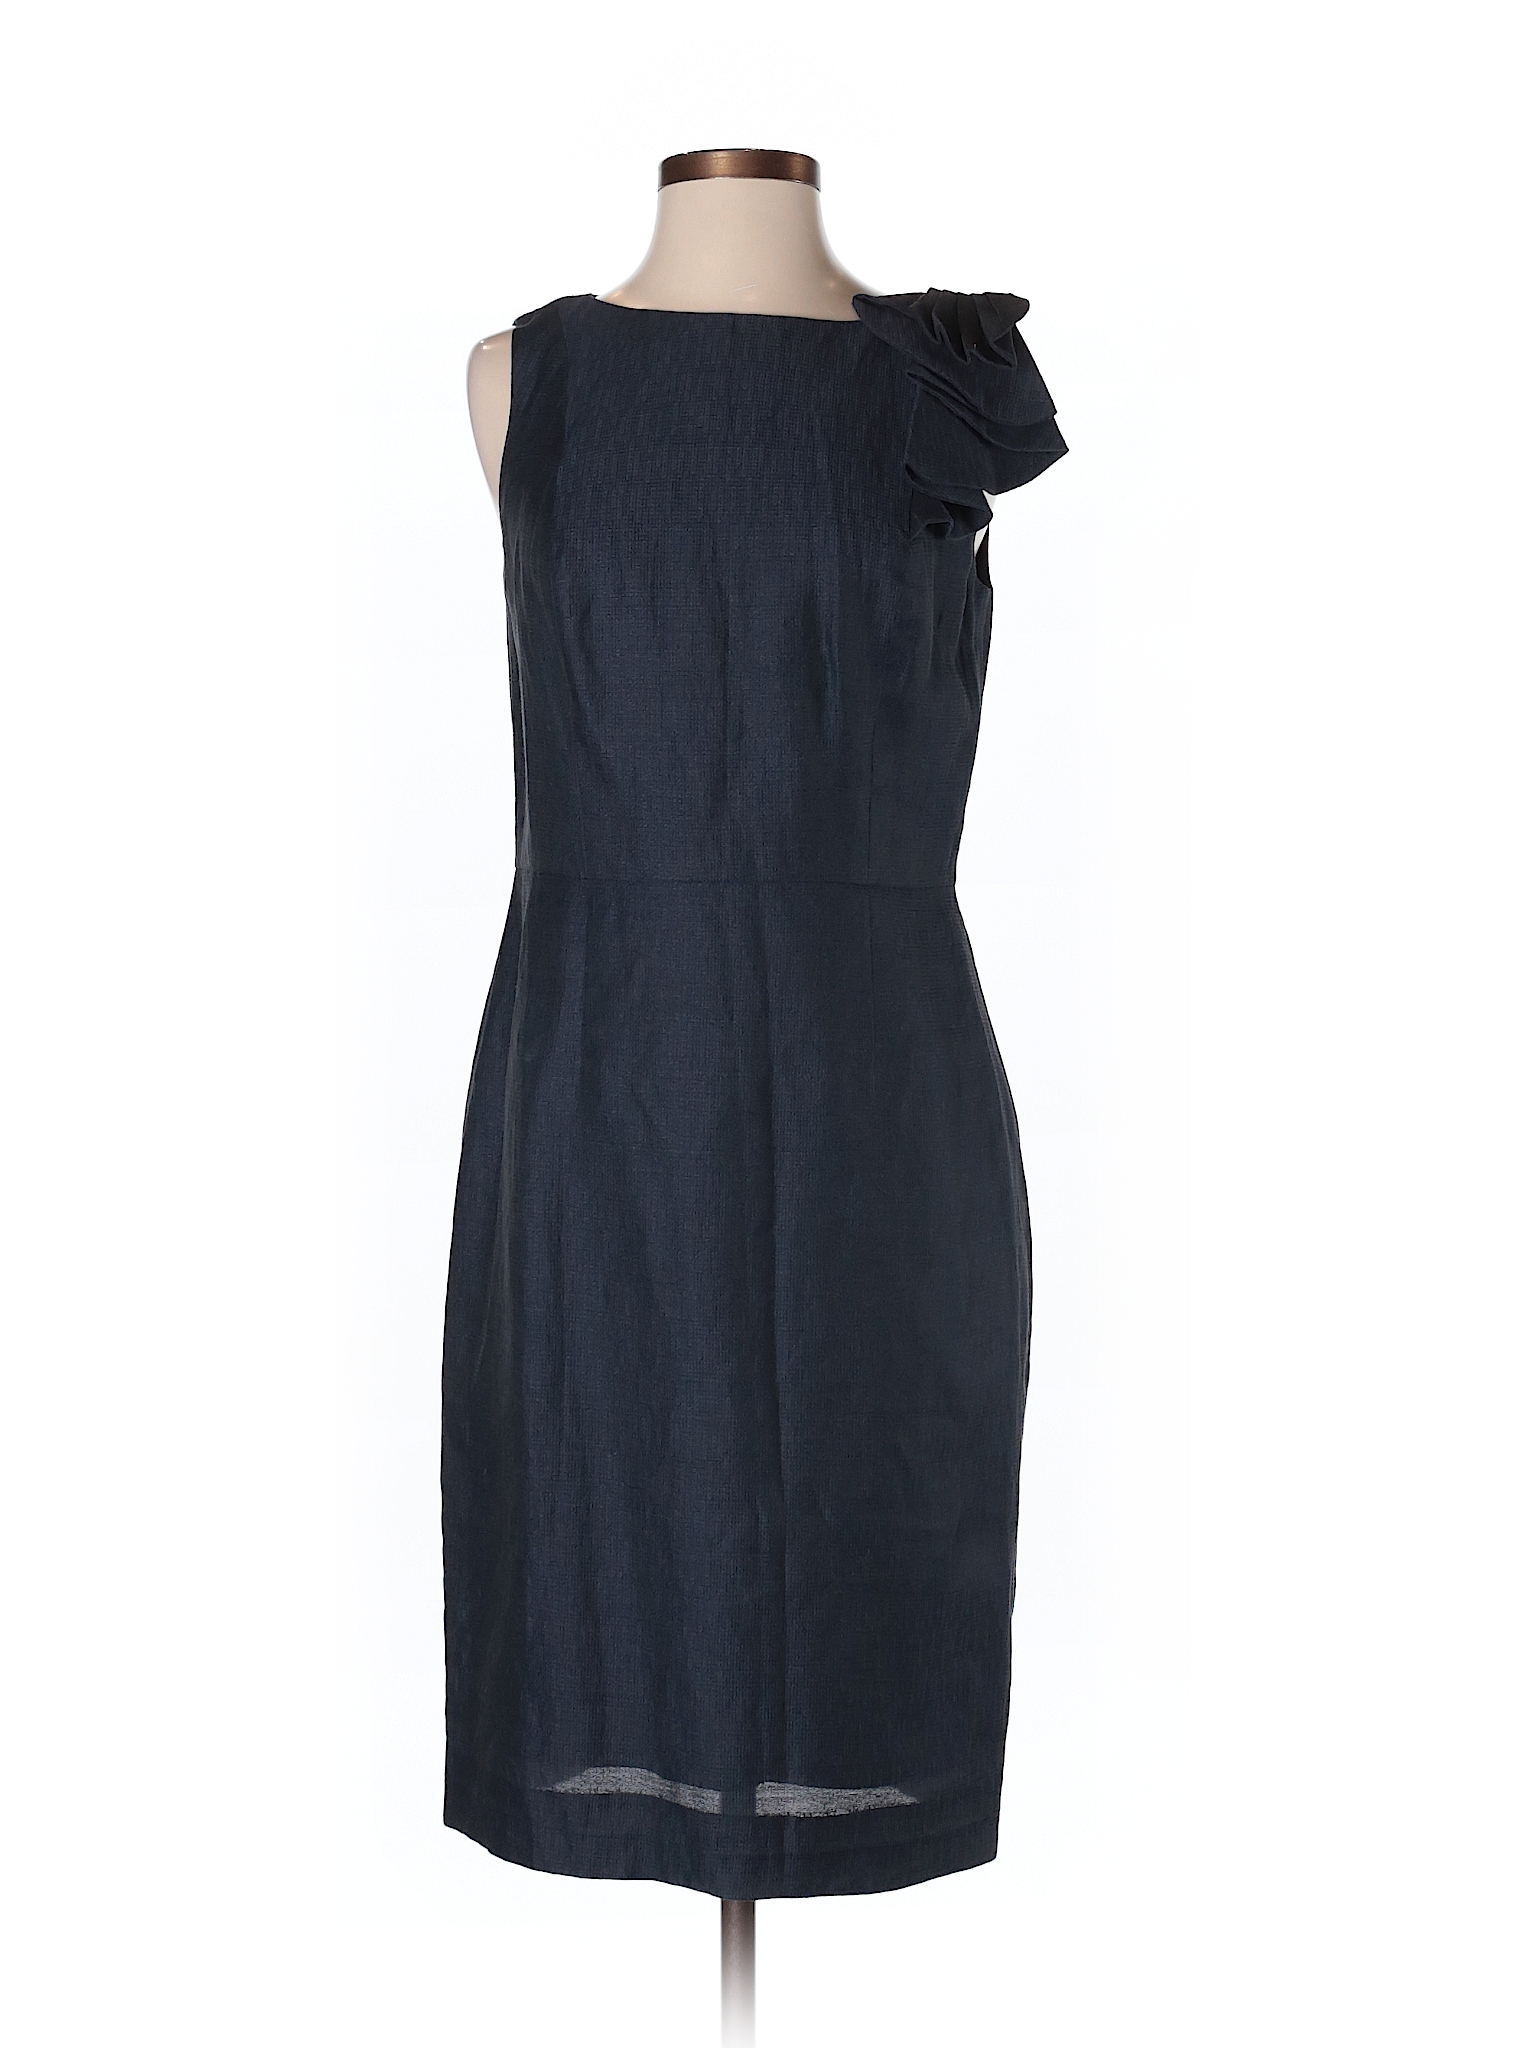 Ann Taylor Casual Dress - 76% off only on thredUP